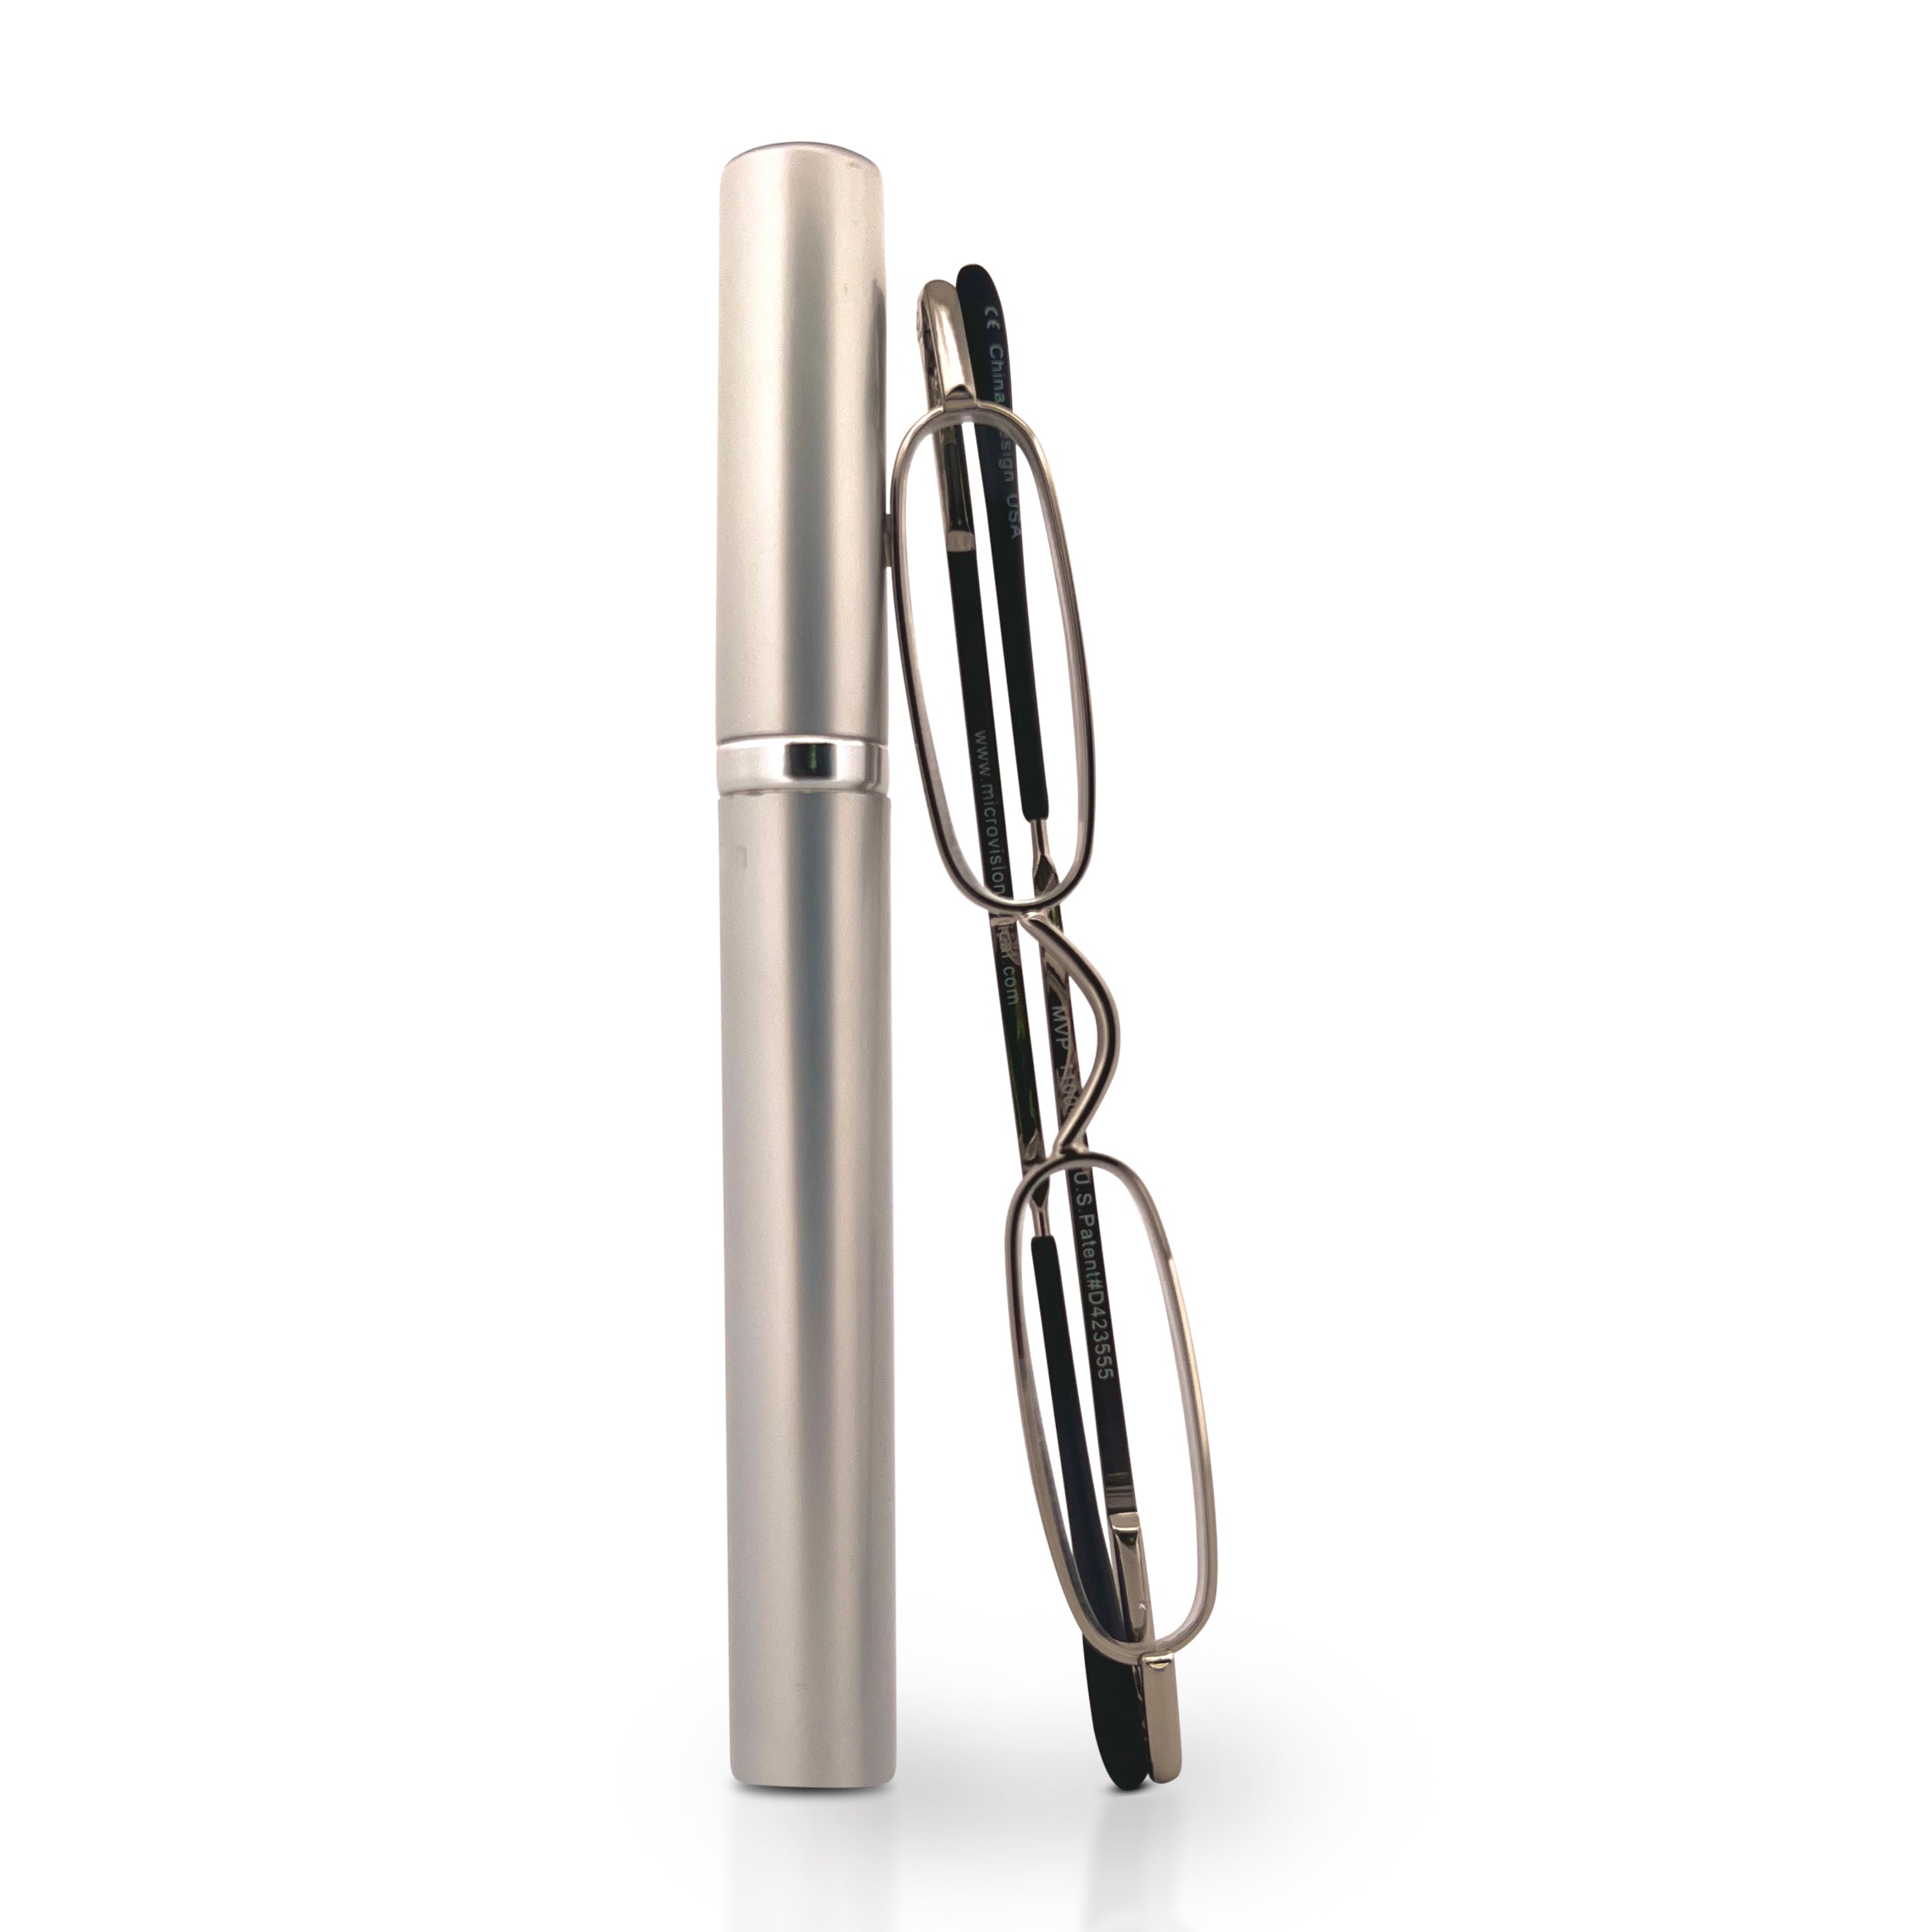 Silver sleek, compact, patented, stainless steel, original mini readers perfect for on the go